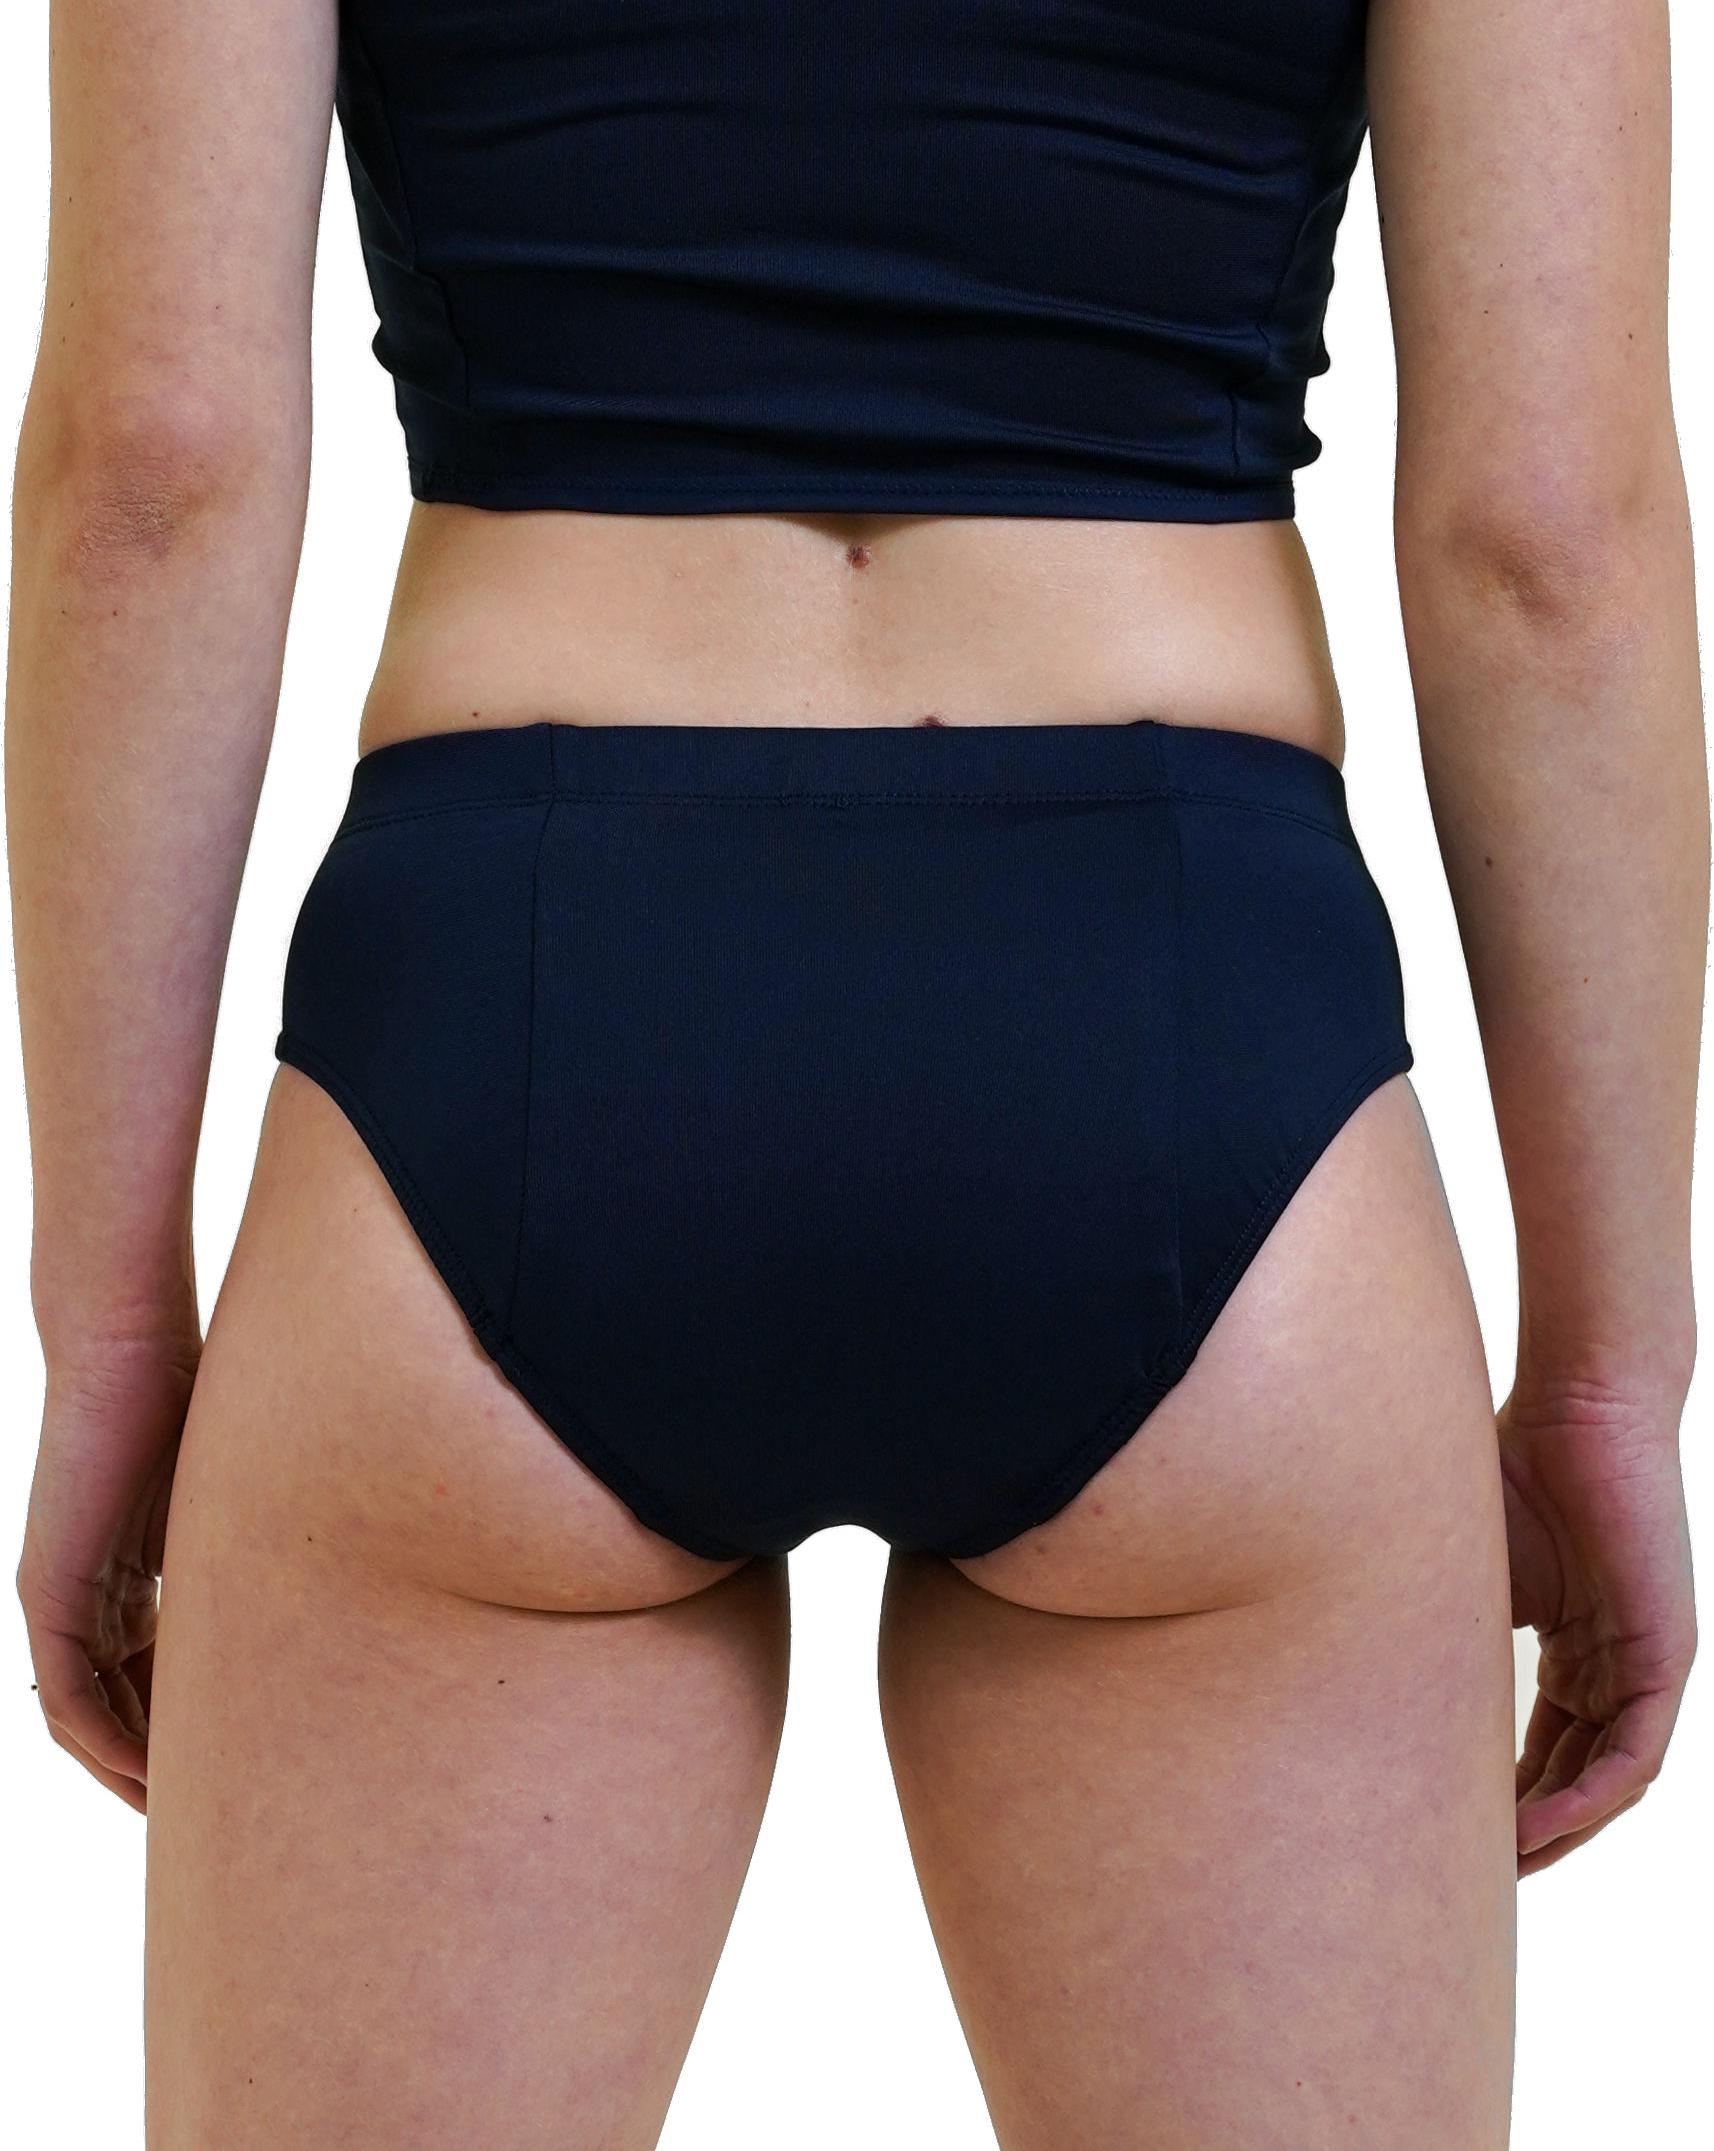 Women's Nike Panties and underwear from $24